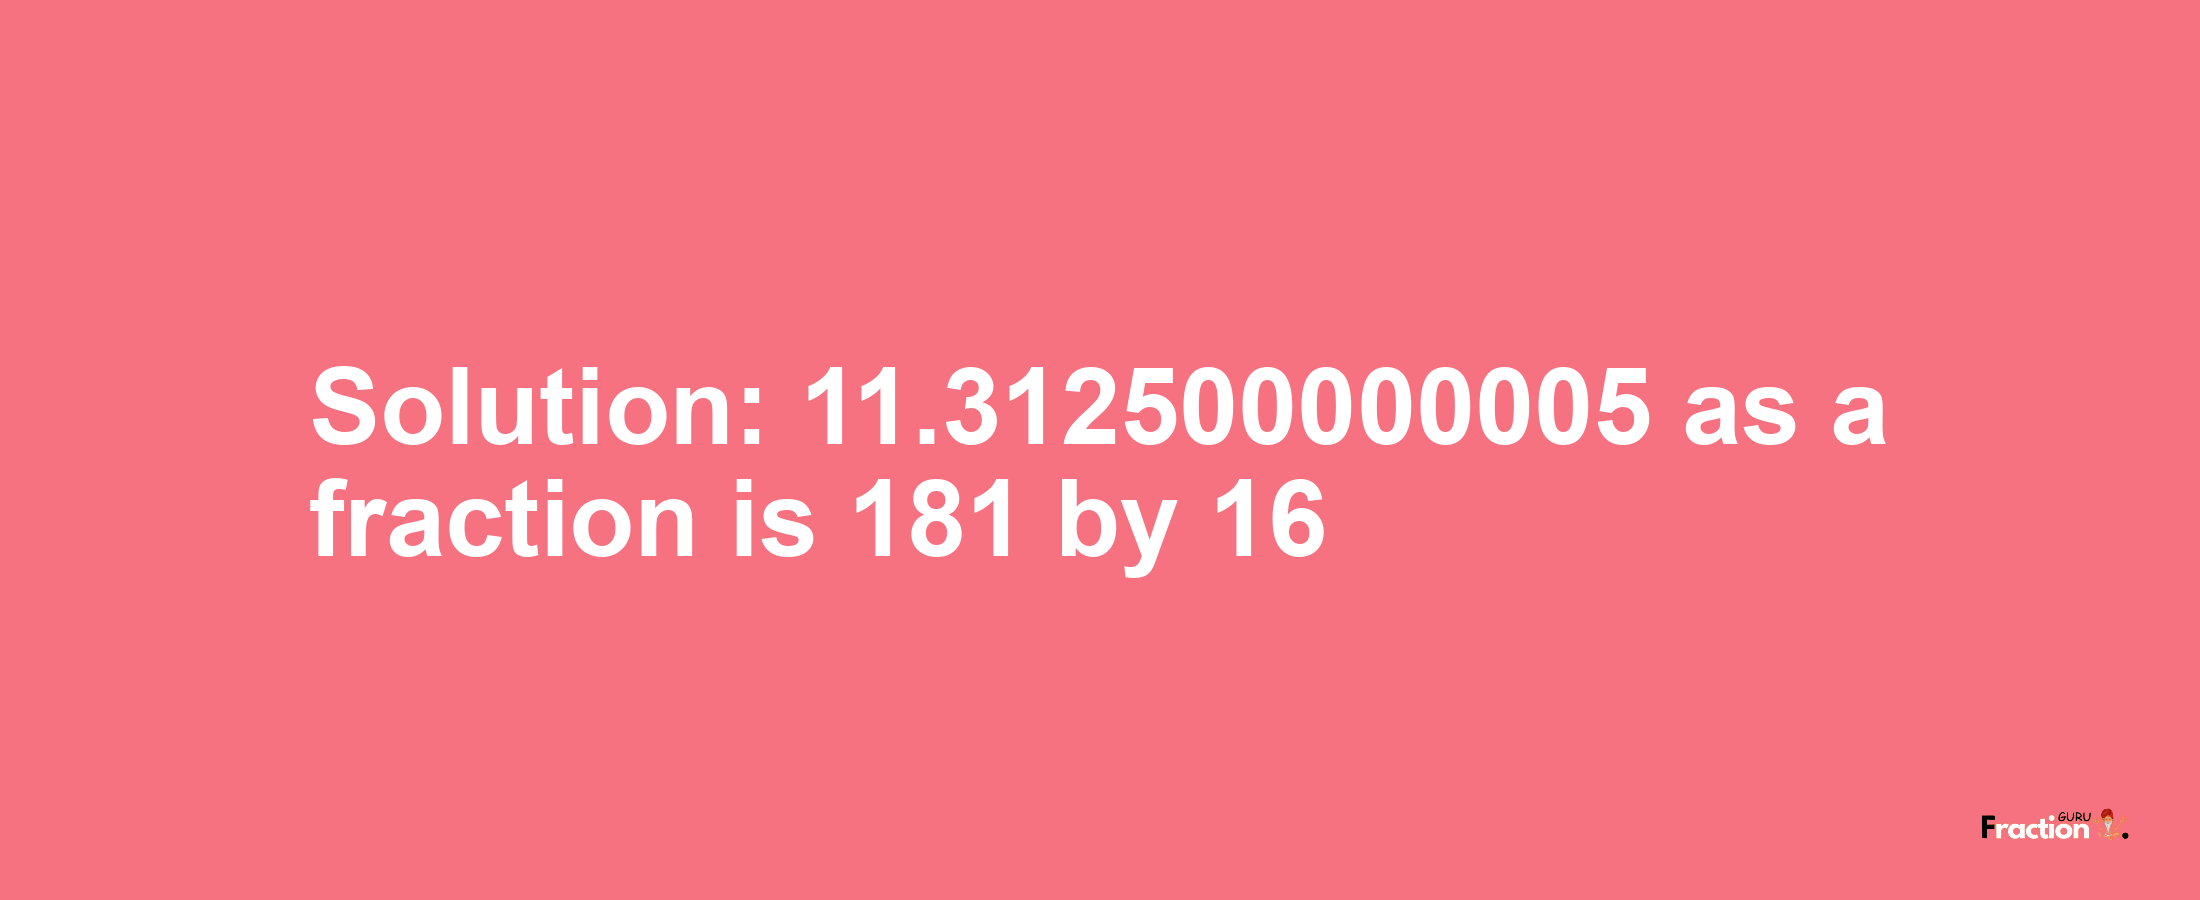 Solution:11.312500000005 as a fraction is 181/16